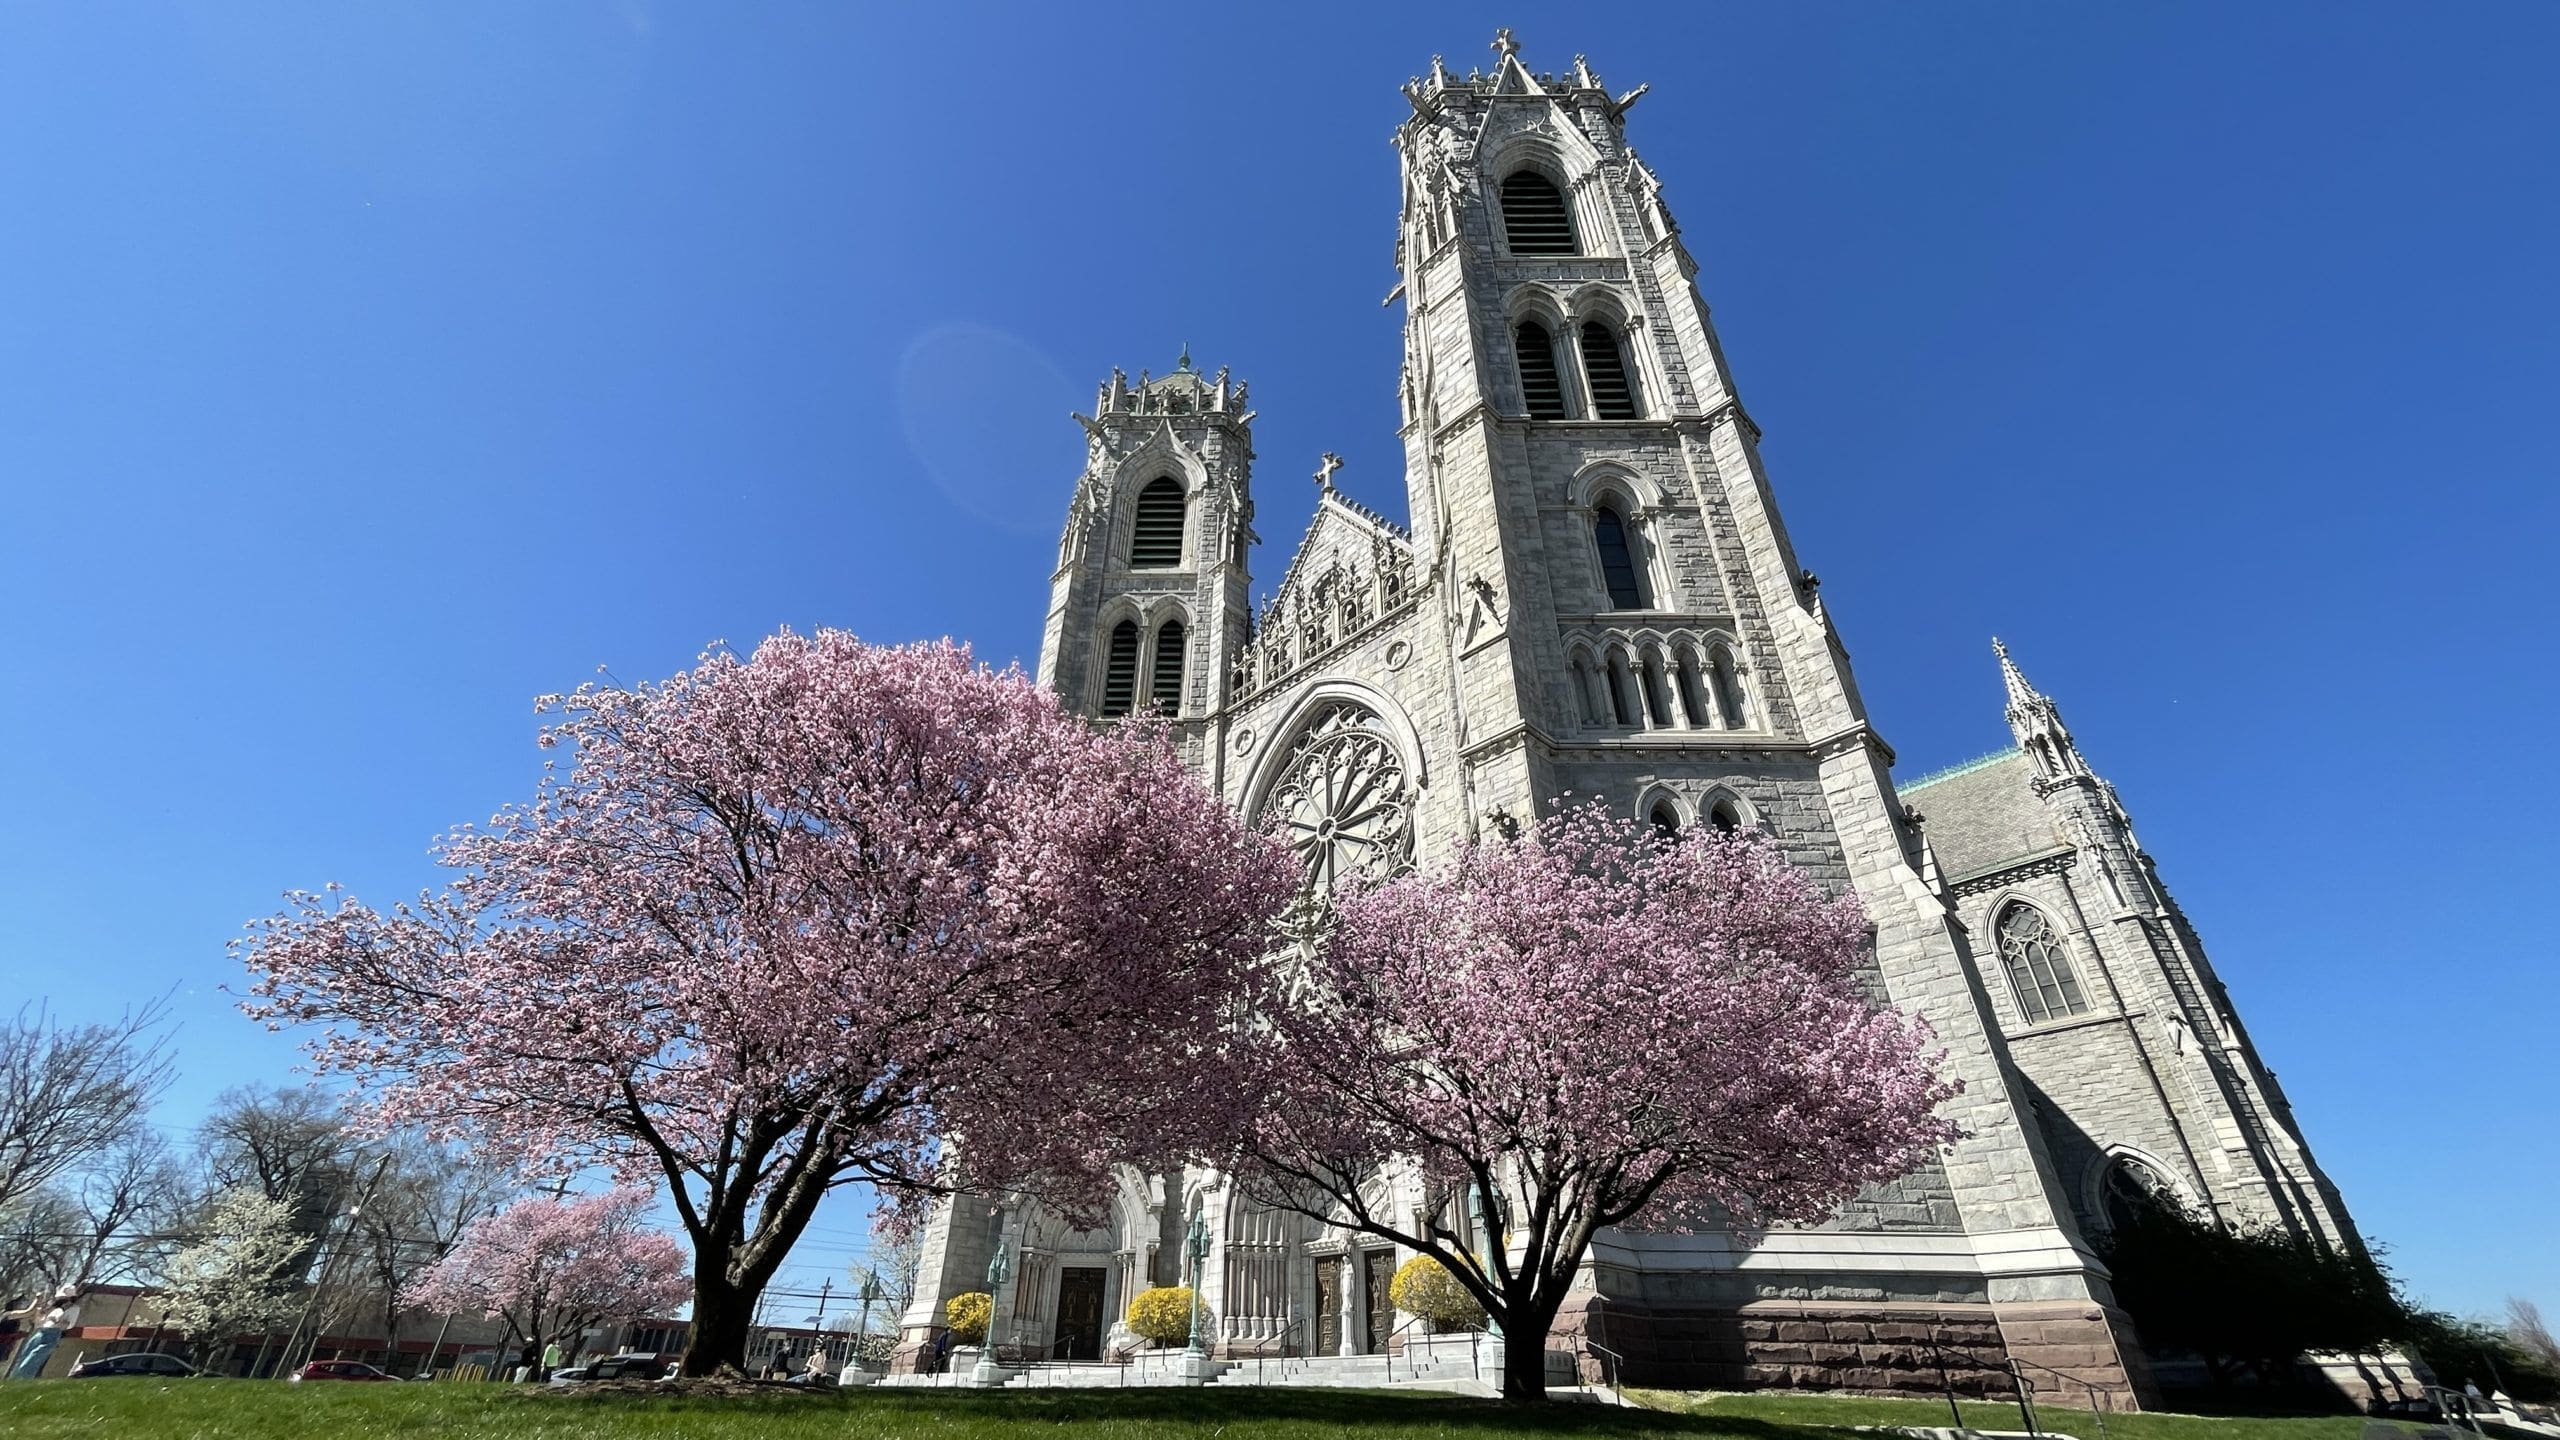 Cathedral Basilica of the Sacred Heart cherry blossoms by Jai Agnish